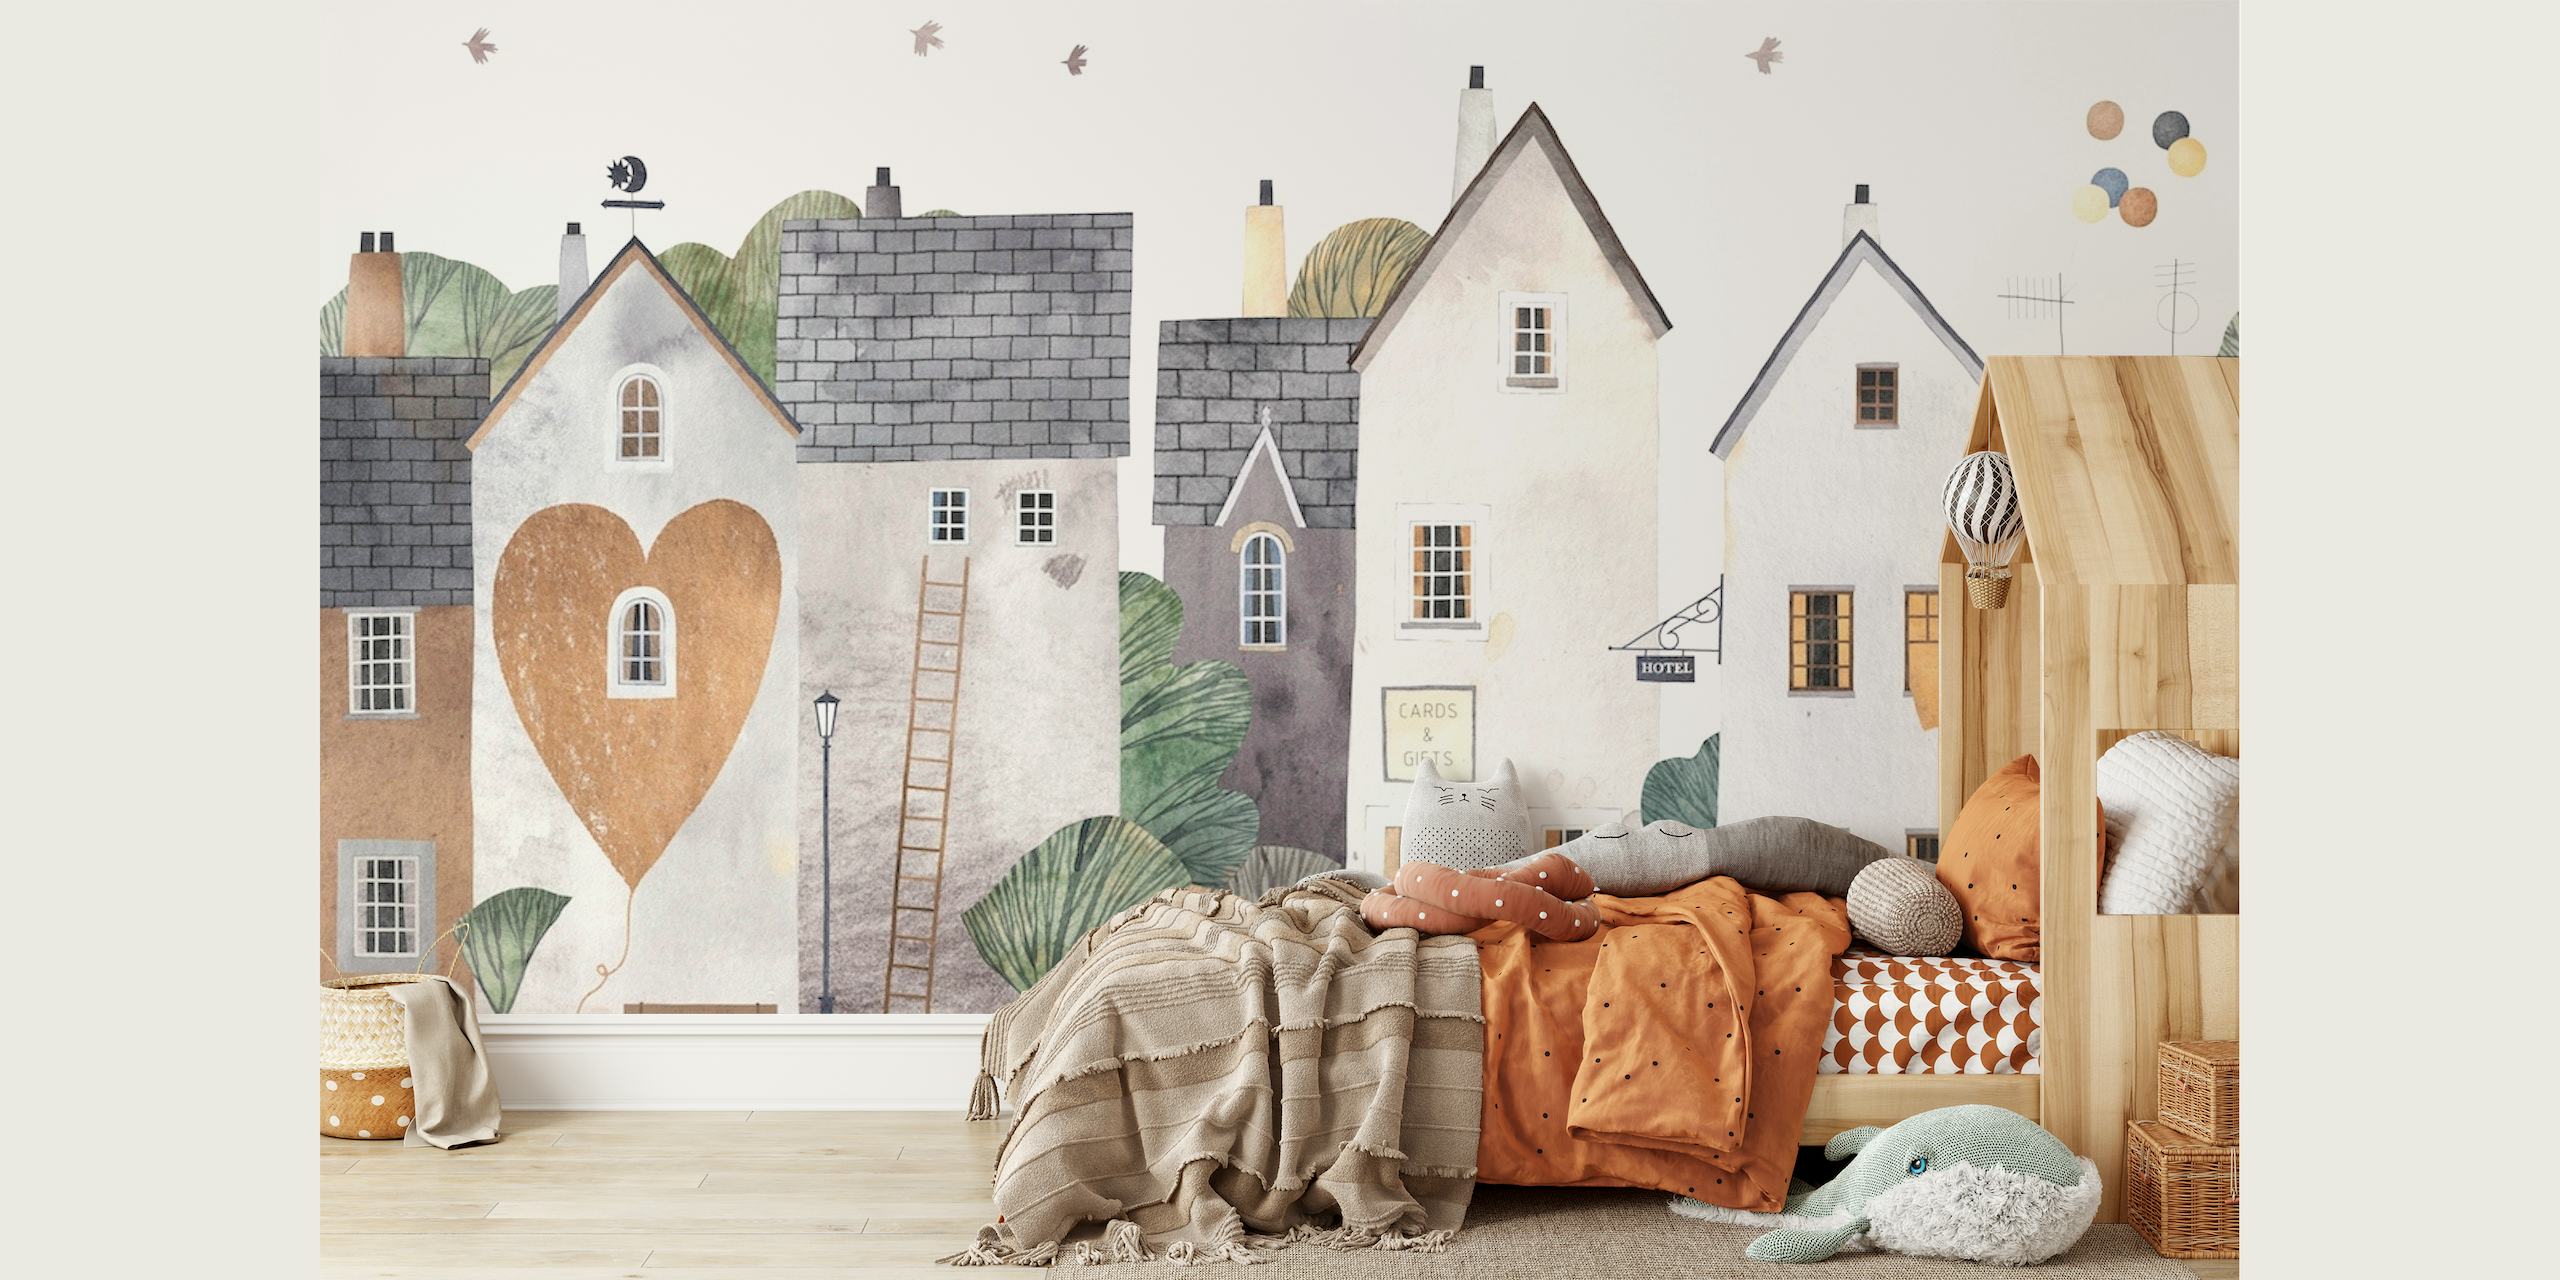 Illustrative wall mural of a whimsical cute town with storybook houses